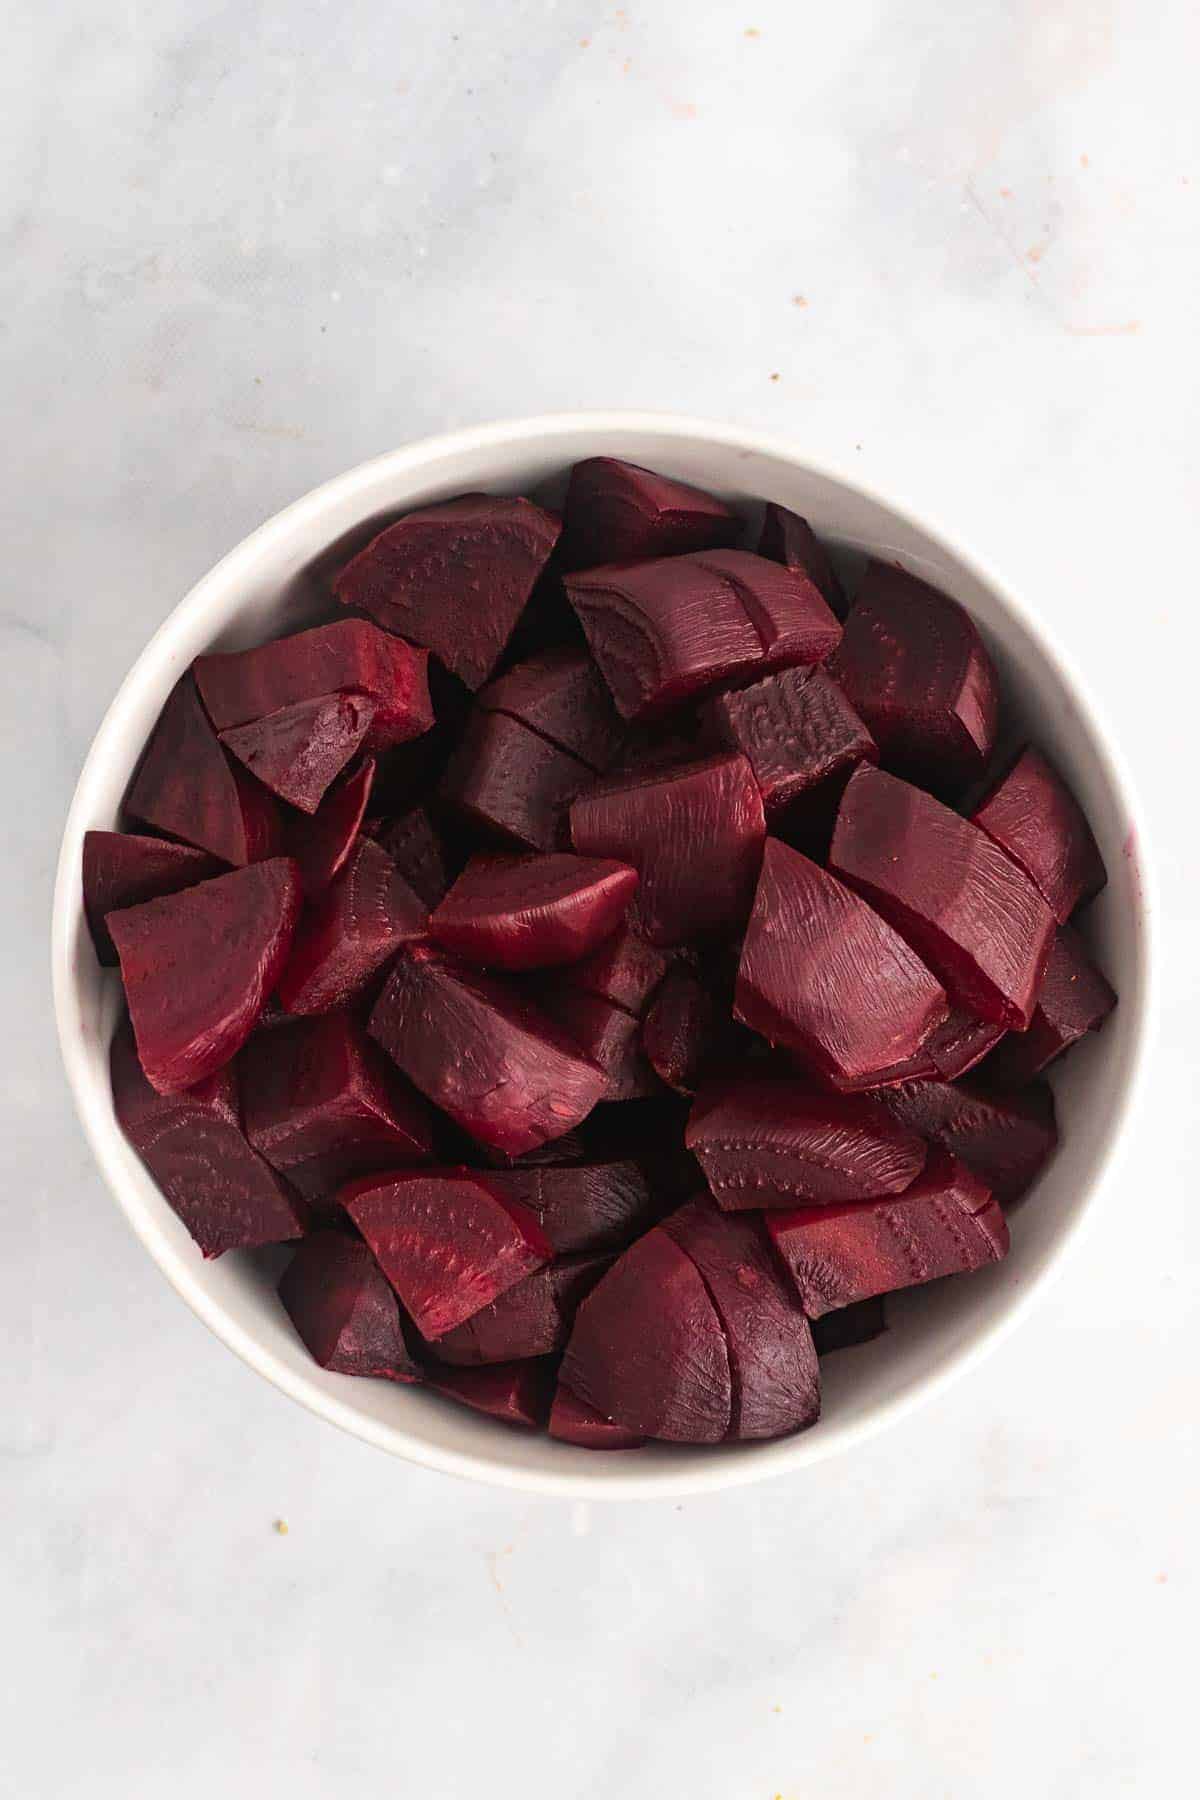 Diced beets in a white bowl